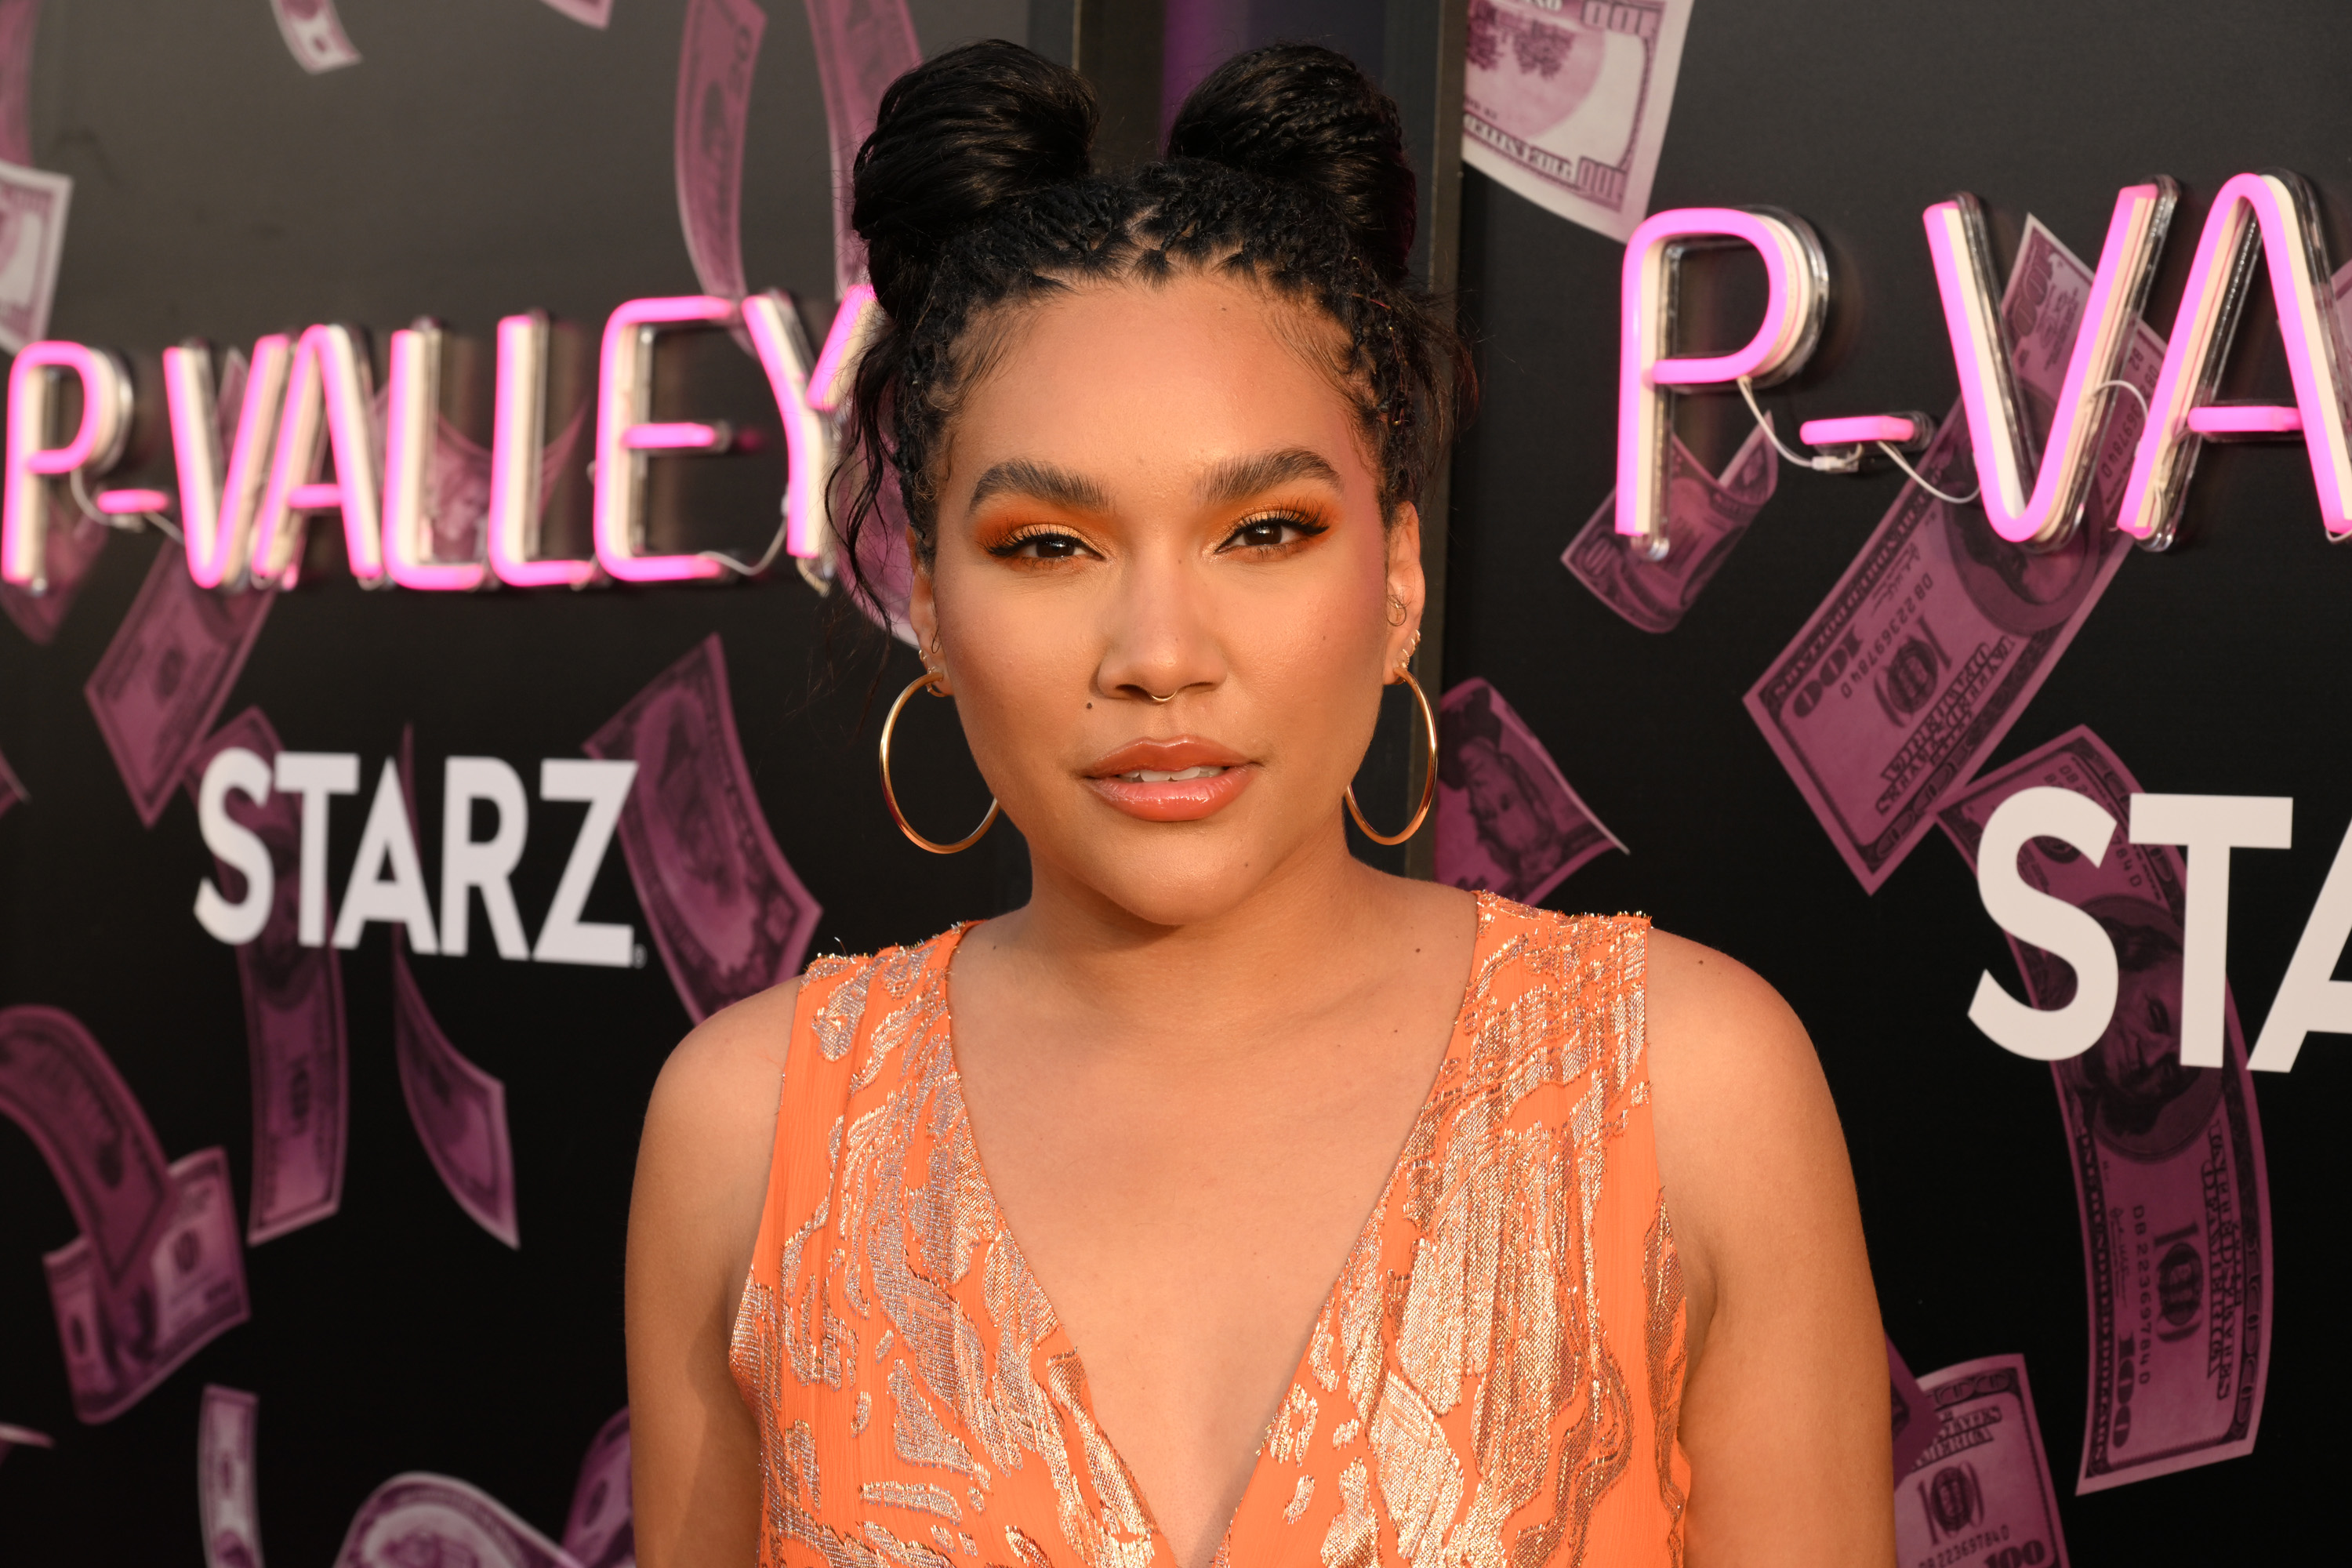 Emmy Raver-Lampman attends STARZ's "P-Valley" Season 2 premiere on, June 2, 2022, in Los Angeles, California. | Source: Getty Images